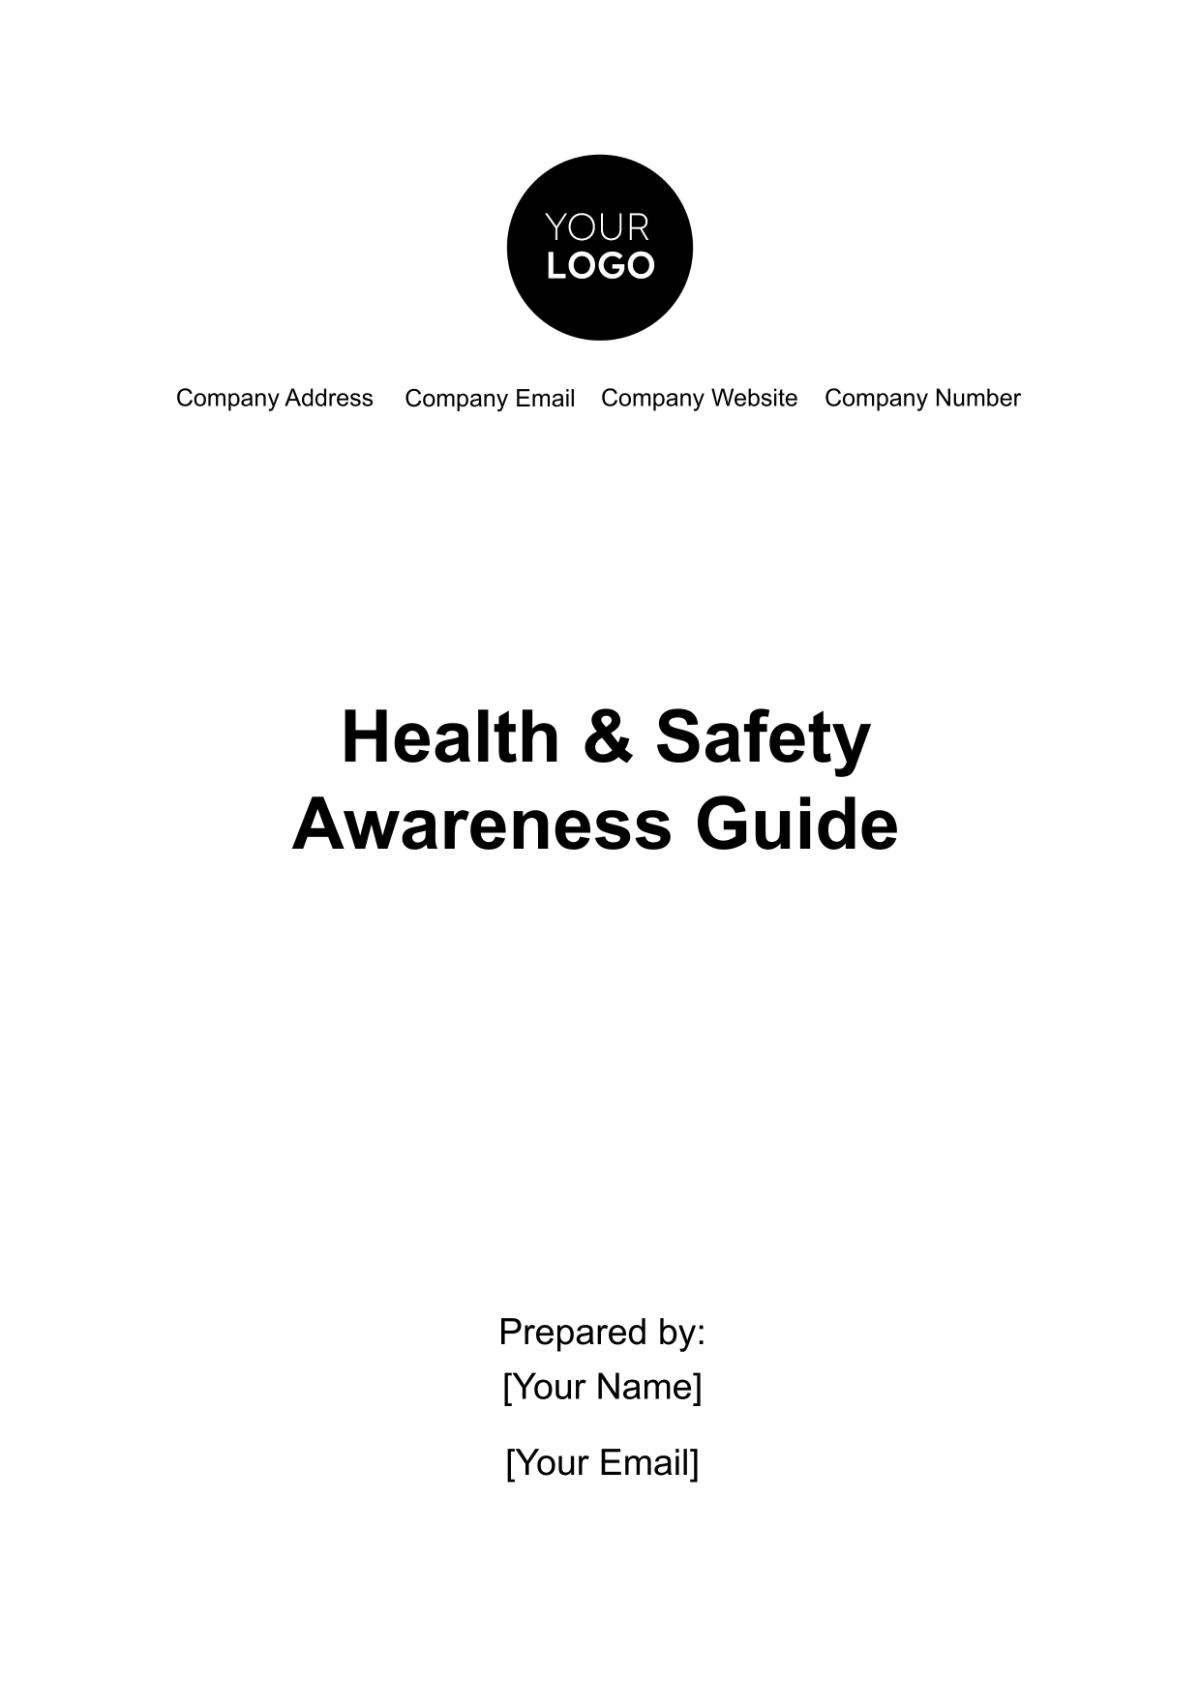 Free Health & Safety Awareness Guide Template